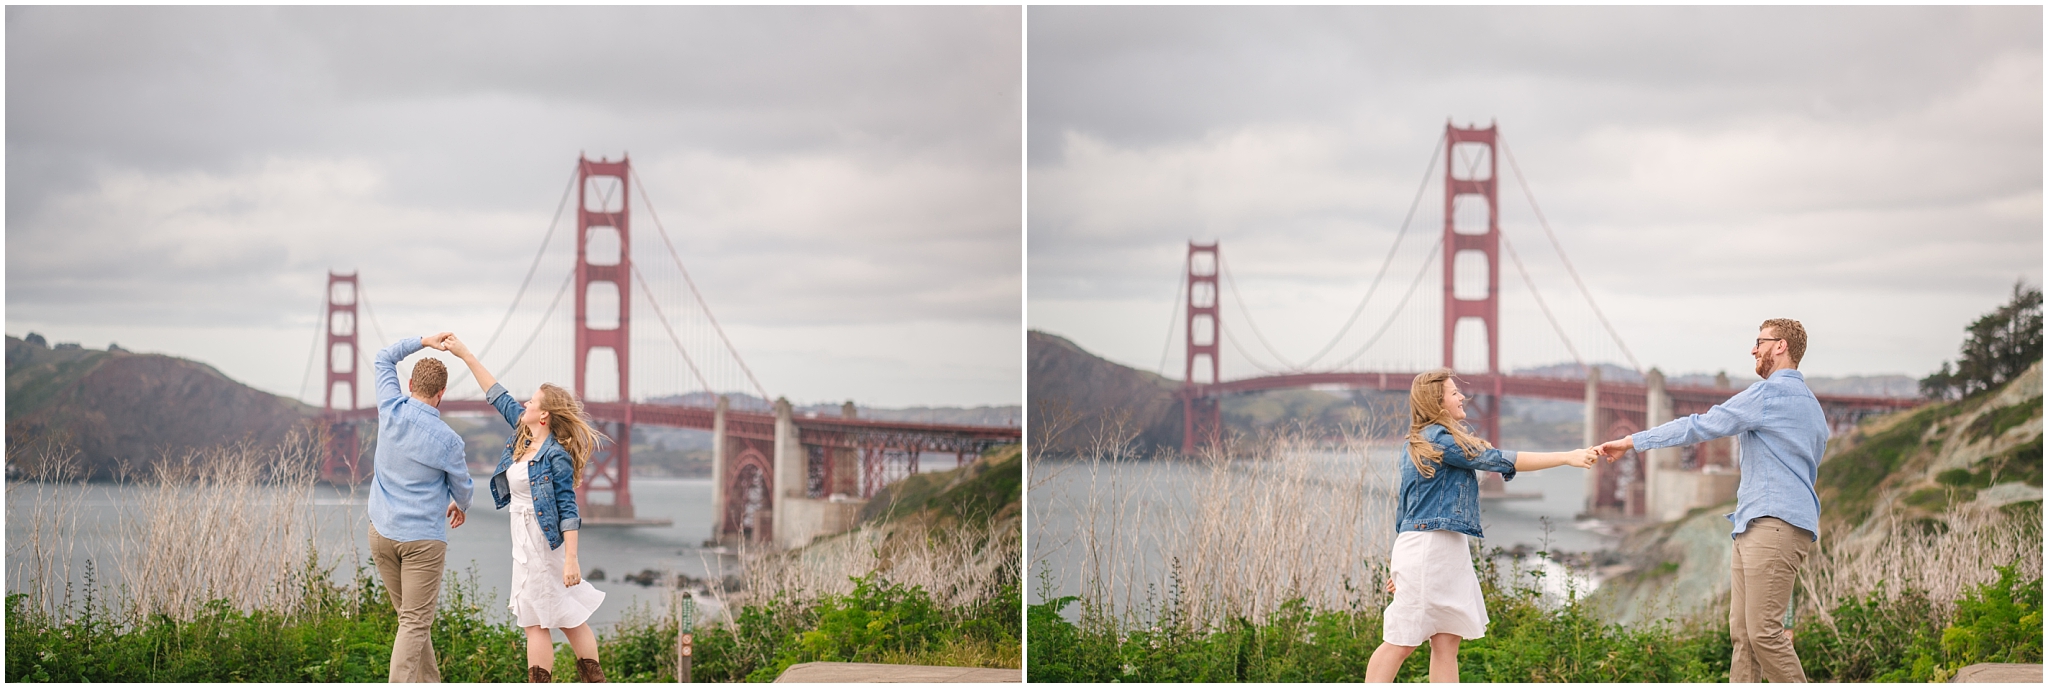 Engaged couple dancing in front of Golden Gate Bridge in San Francisco